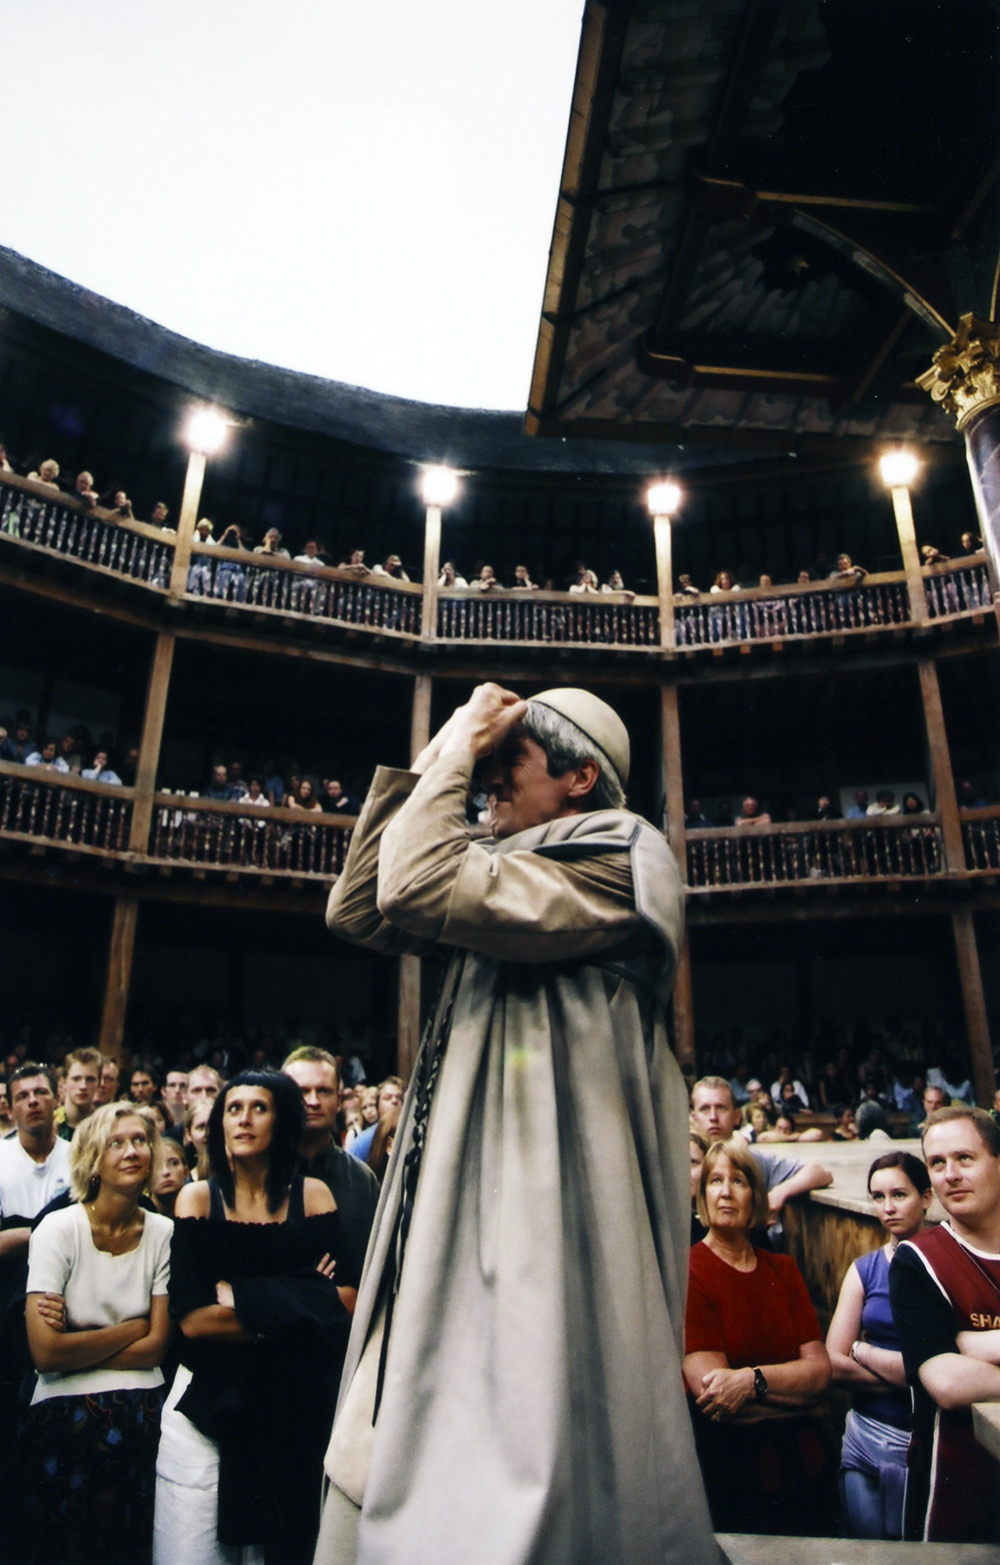 A man holding his hands up to his face stands in the Yard of the Globe Theatre, surrounded by audience members.